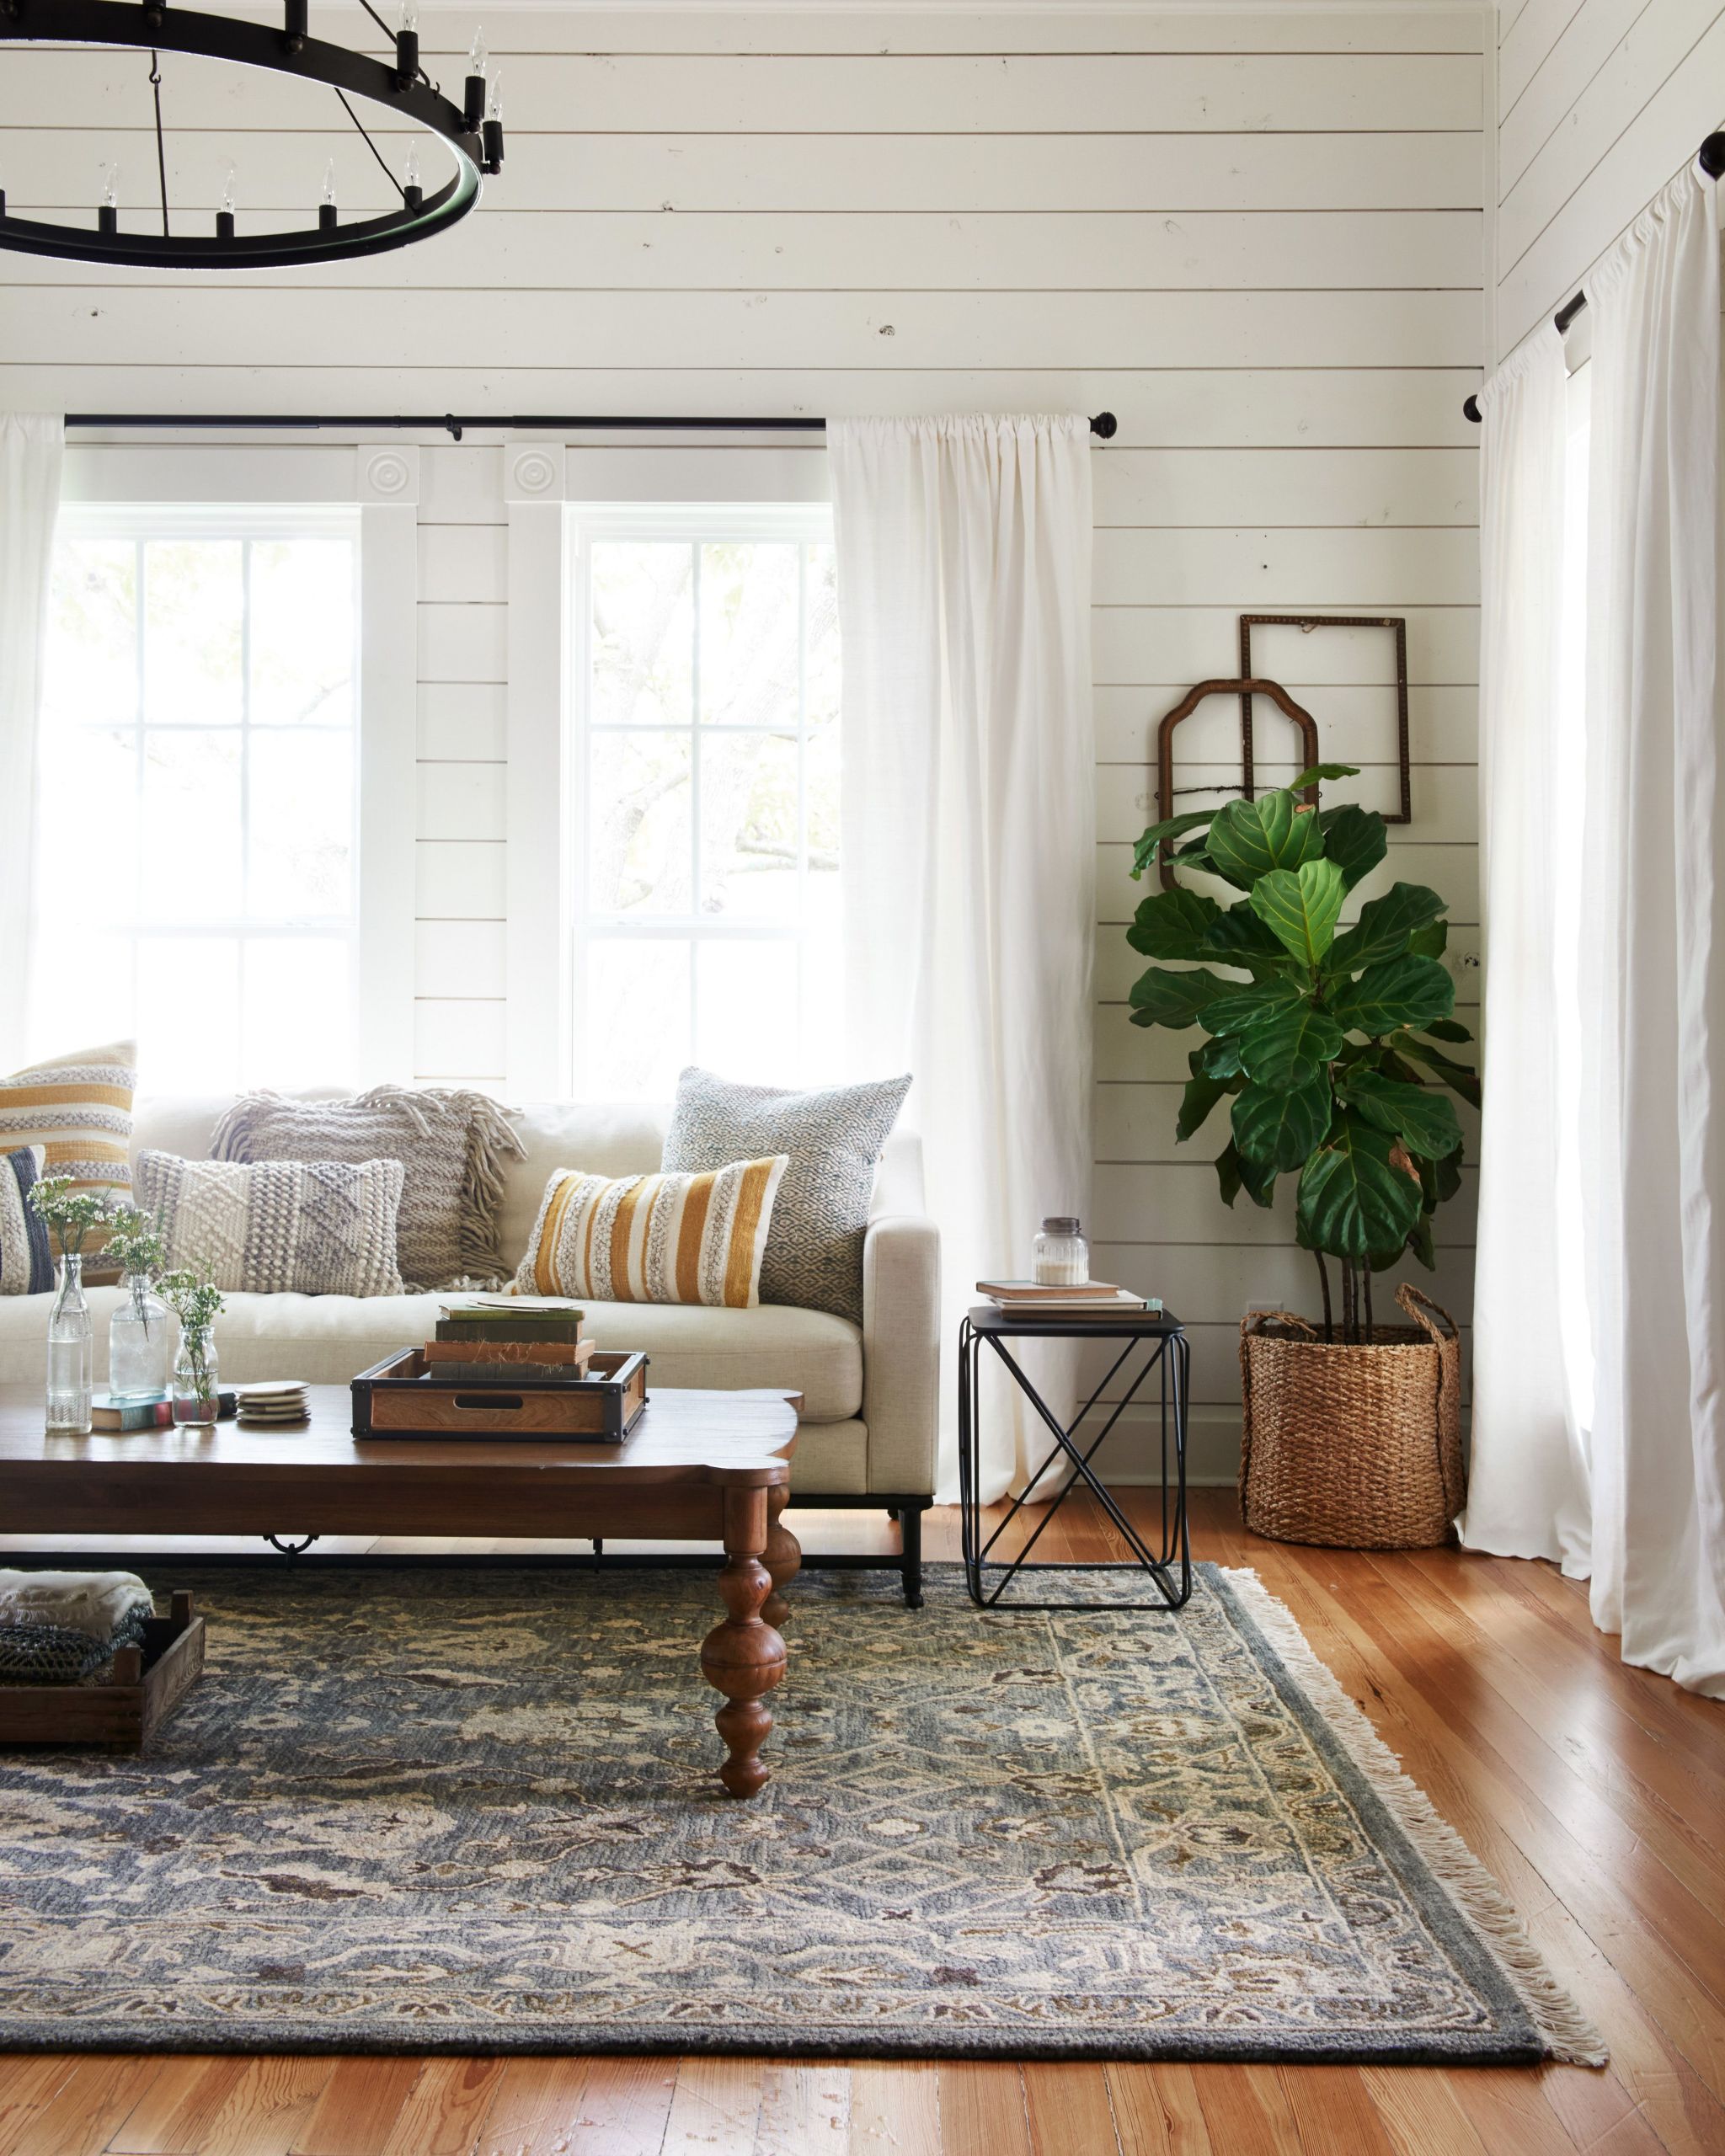 Joanna Gaines Living Room Ideas Beautiful With Subdued Colors And Traditional Designs The Hanover Of Joanna Gaines Living Room Ideas Scaled 